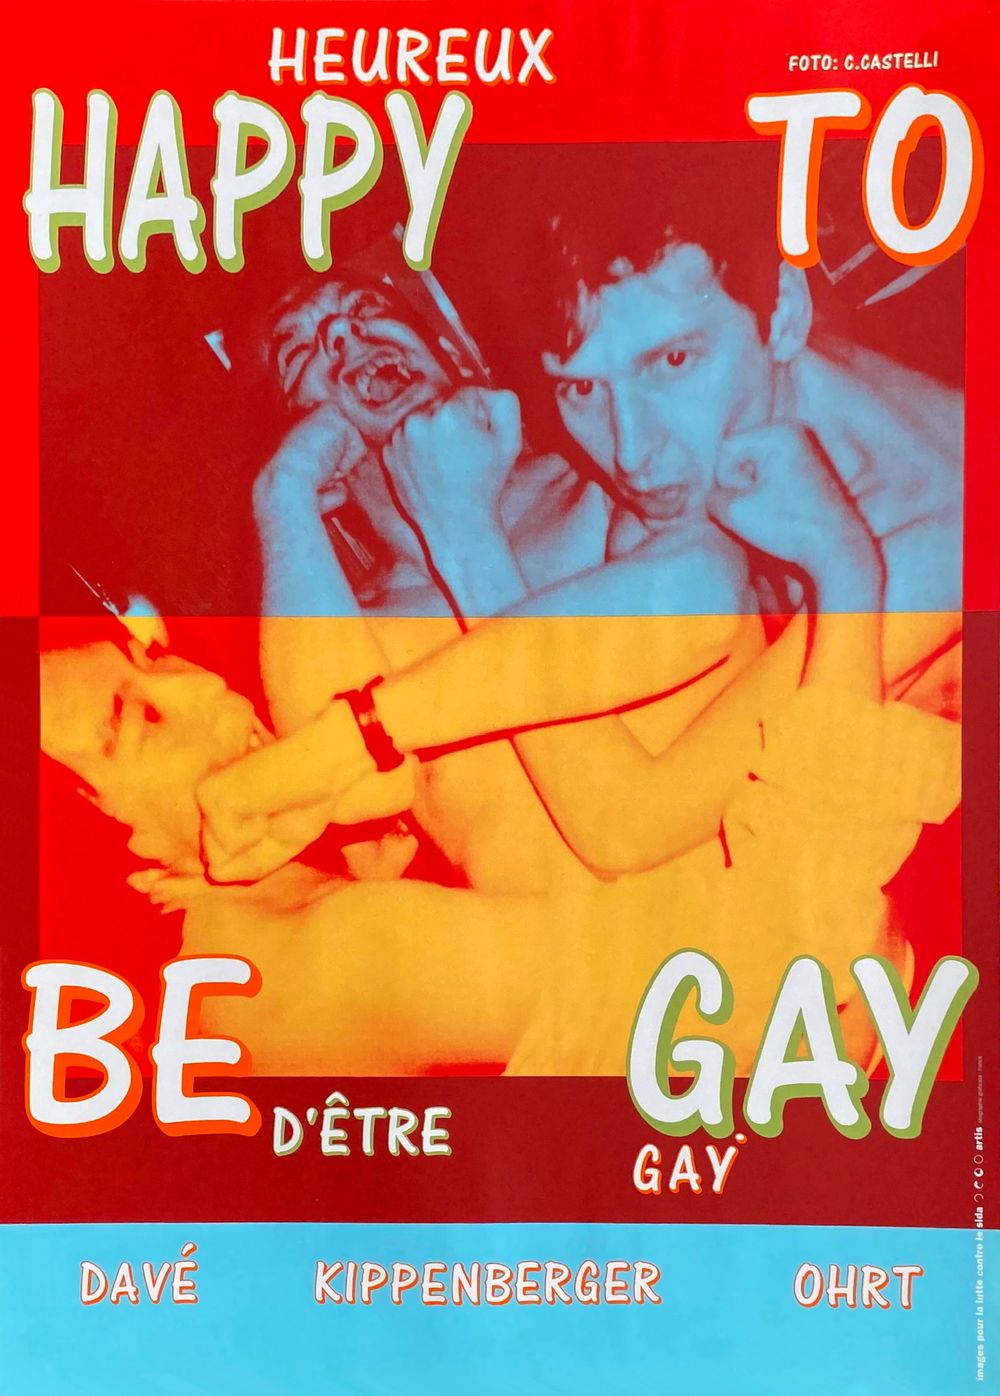 Happy to be gay 